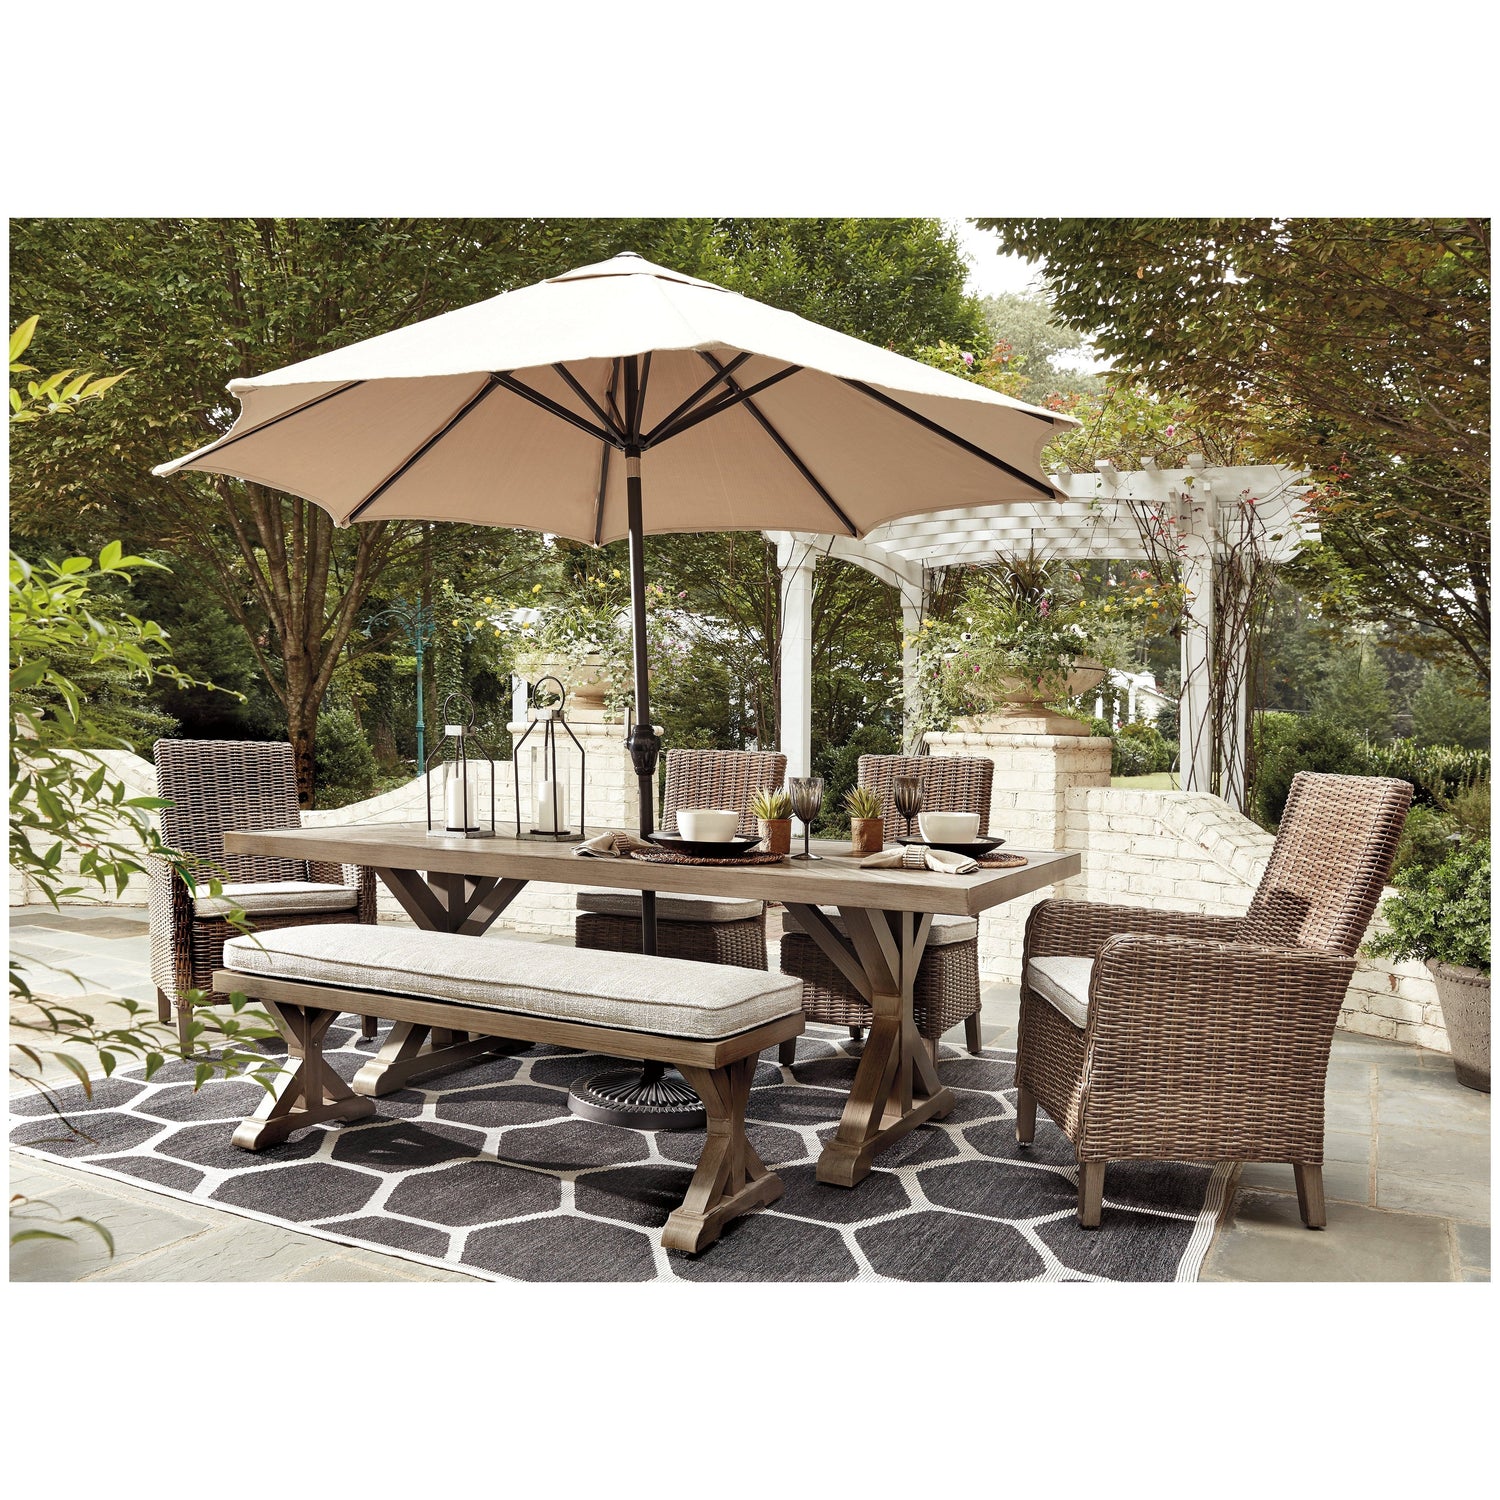 Beachcroft Outdoor Dining Table with 4 Chairs and Bench Ash-P791P4